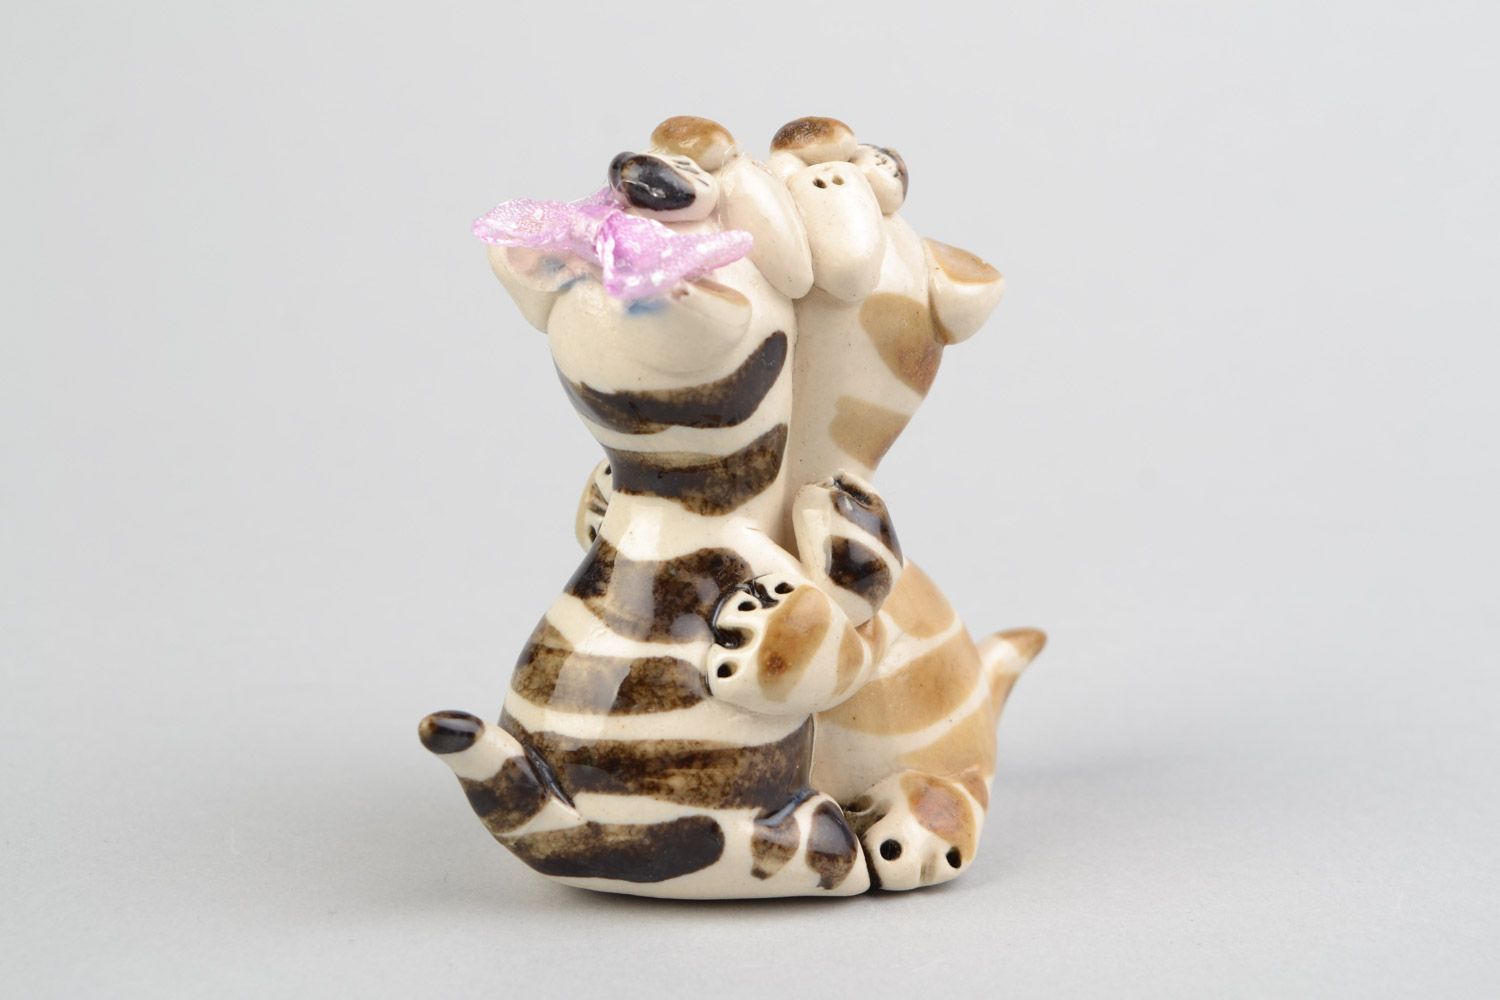 Homemade miniature ceramic figurine of cats in love painted with colorful glaze photo 4